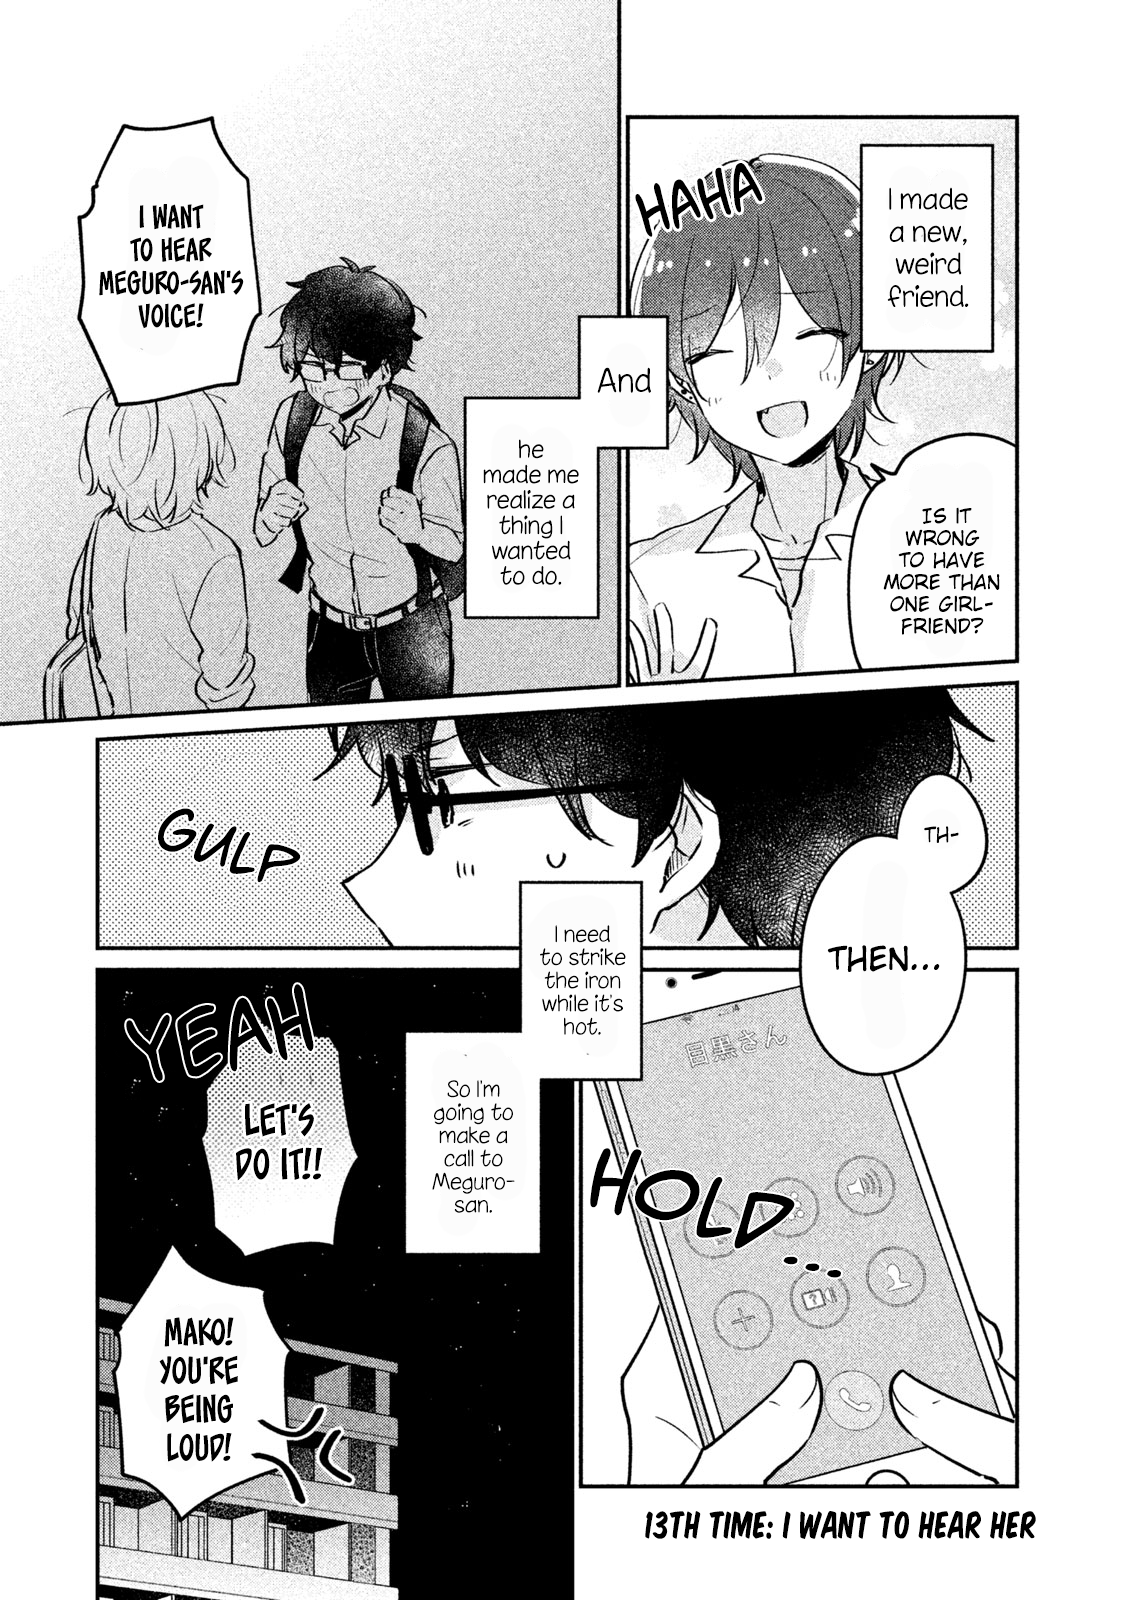 It's Not Meguro-San's First Time Vol.2 Chapter 13: I Want To Hear Her - Picture 2